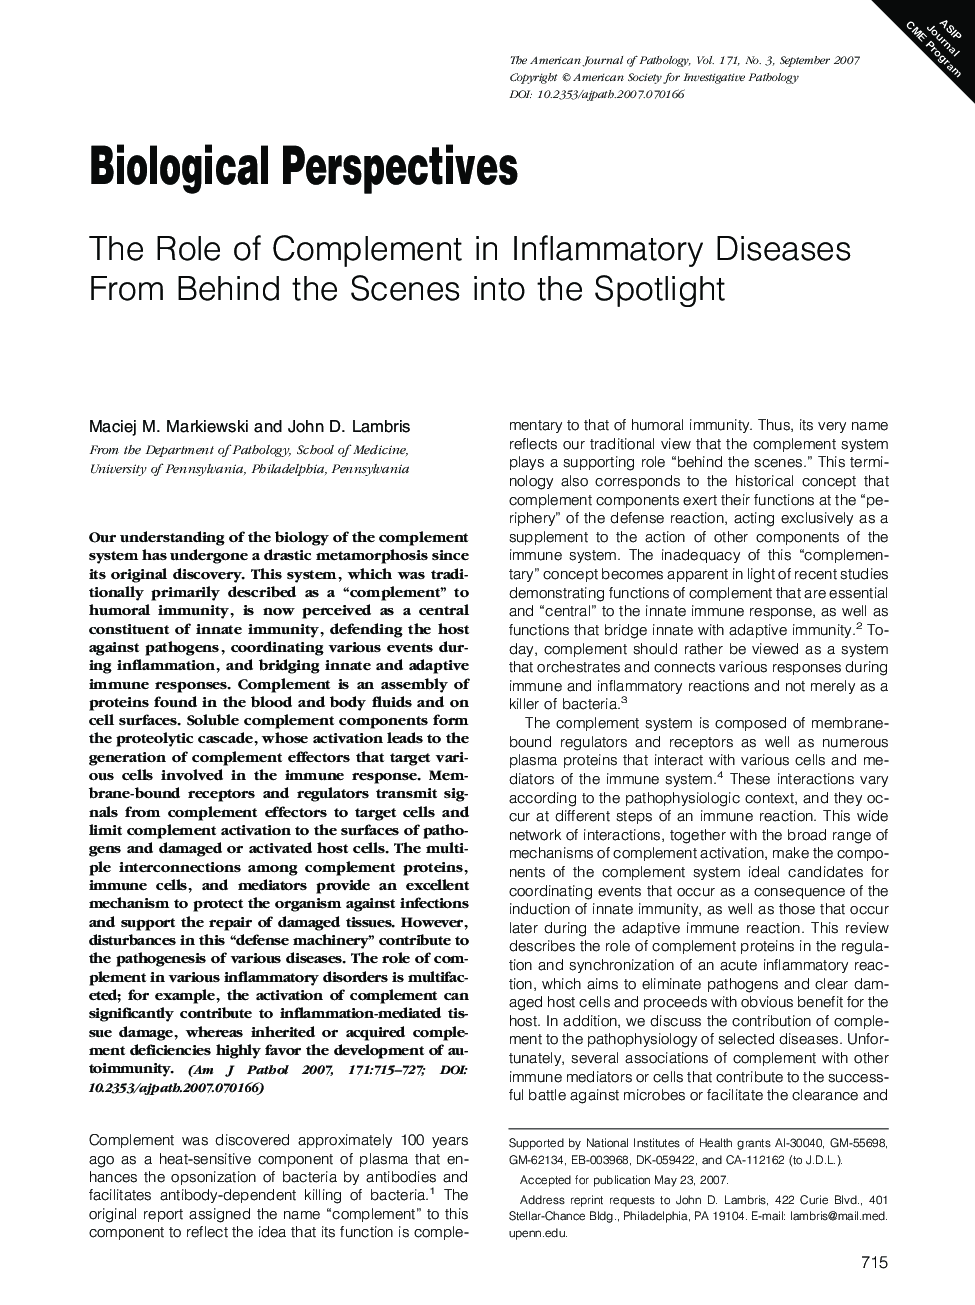 Biological PerspectivesThe Role of Complement in Inflammatory Diseases From Behind the Scenes into the Spotlight